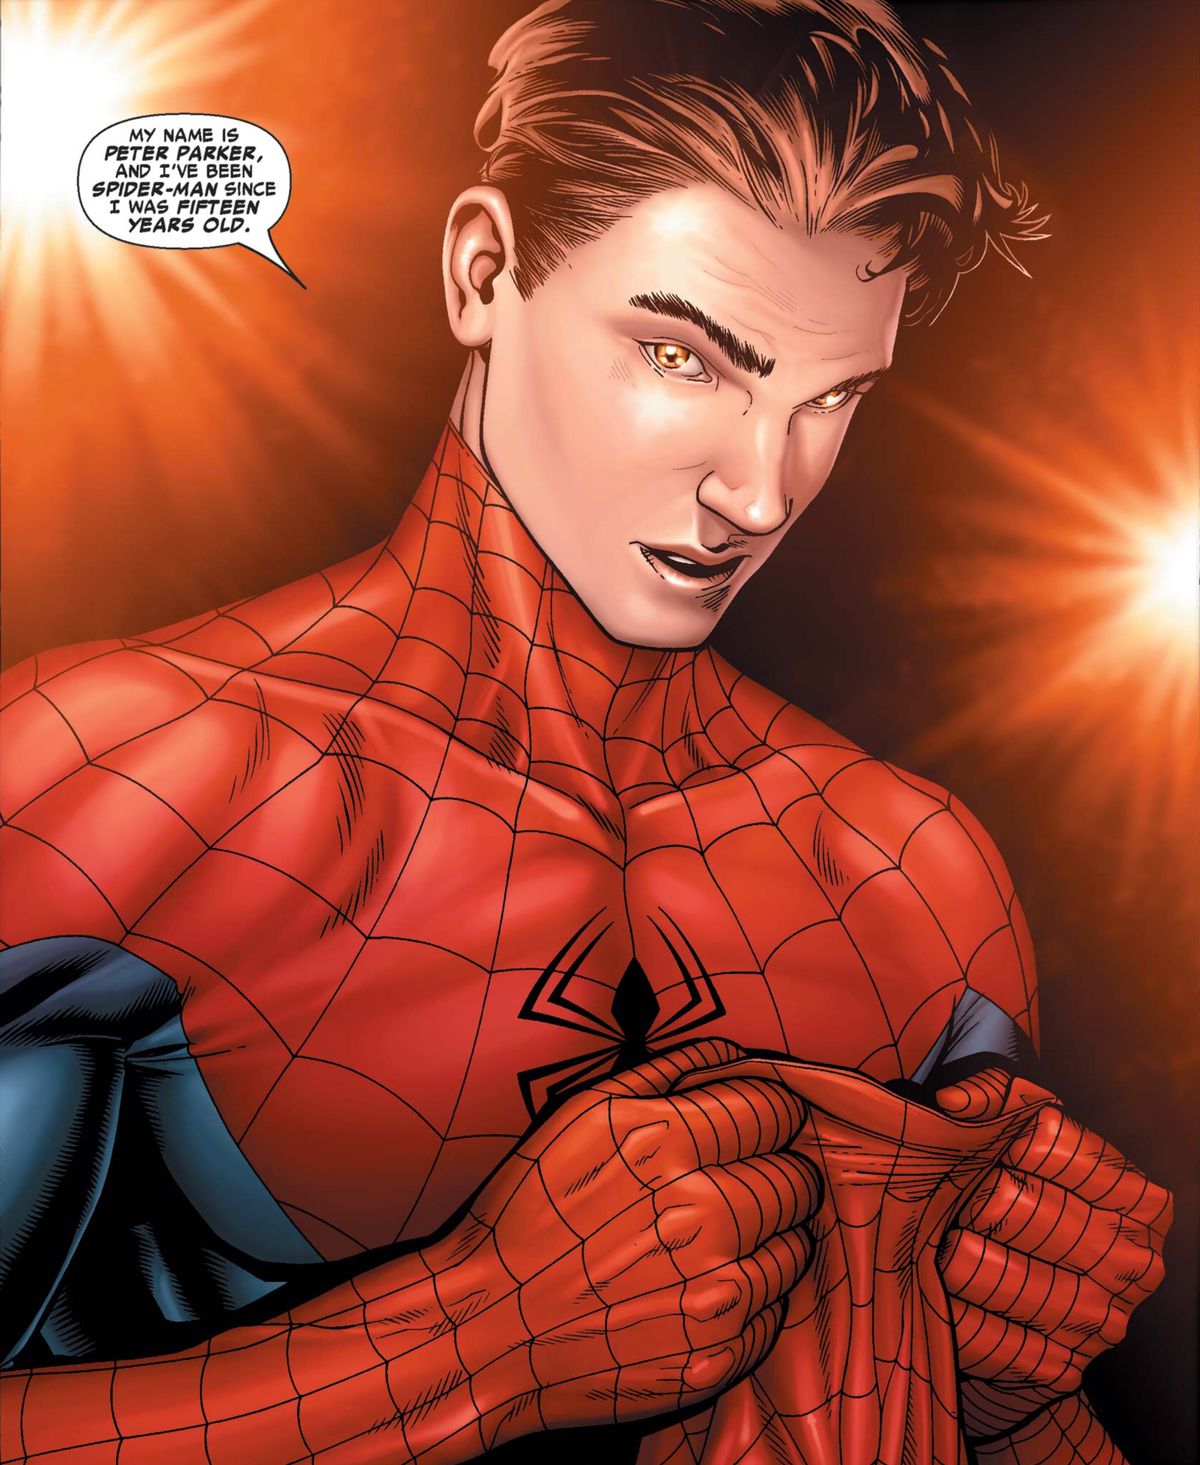 Peter Parker unmasks in front of flashing photographers, saying, “My name is Peter Parker and I’ve been Spider-Man since I was 15 years old,” in Civil War #2, Marvel Comics (2006).